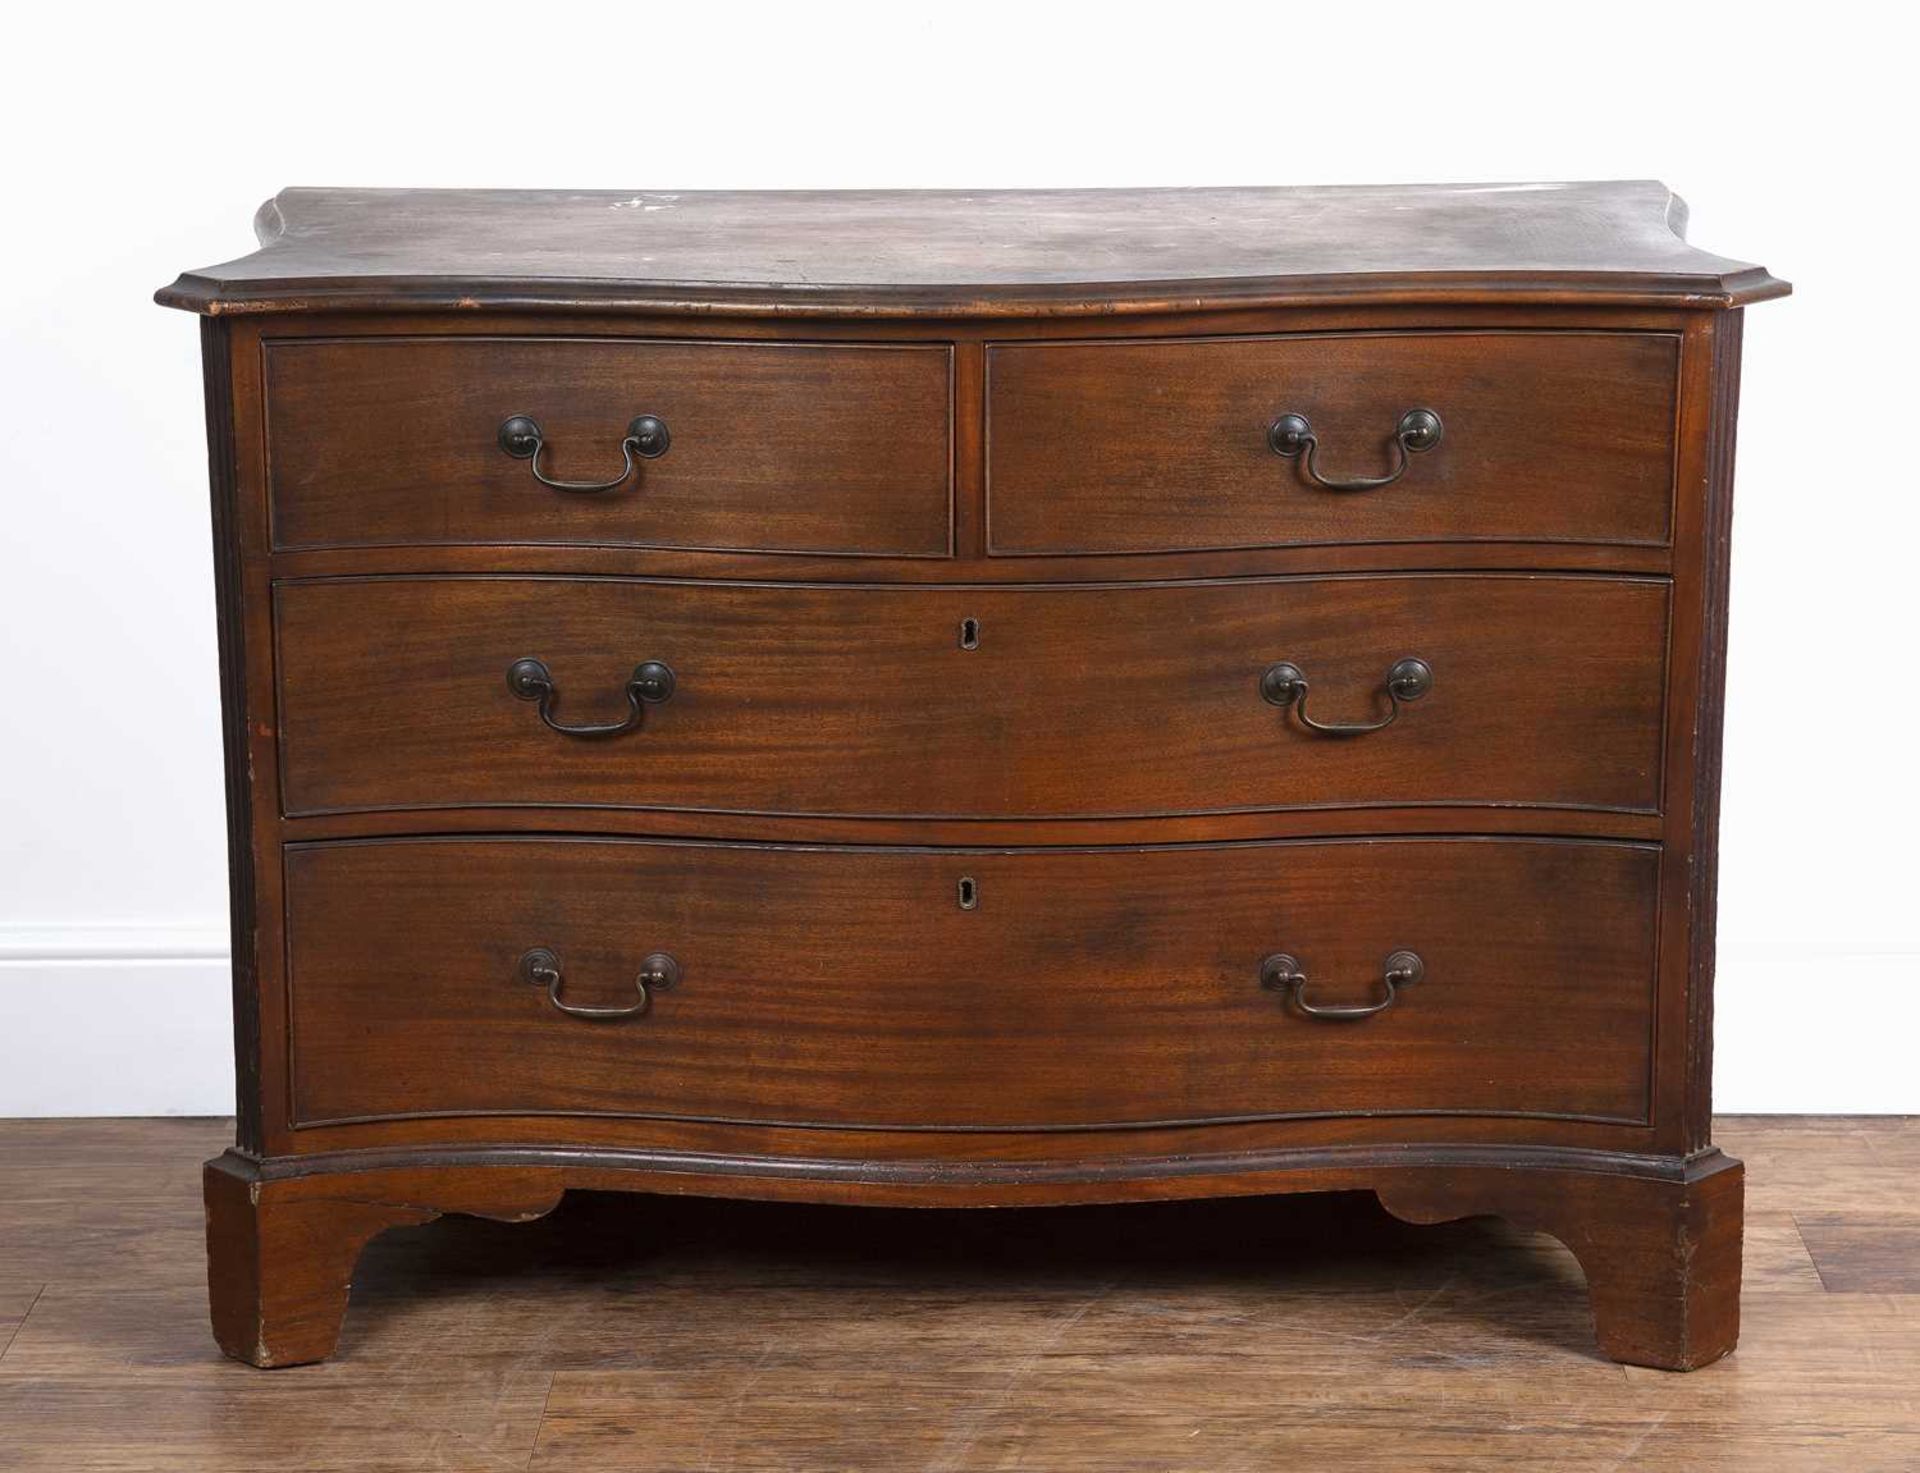 Mahogany serpentine chest 19th Century, fitted three drawers with brass handles and fluted sides,